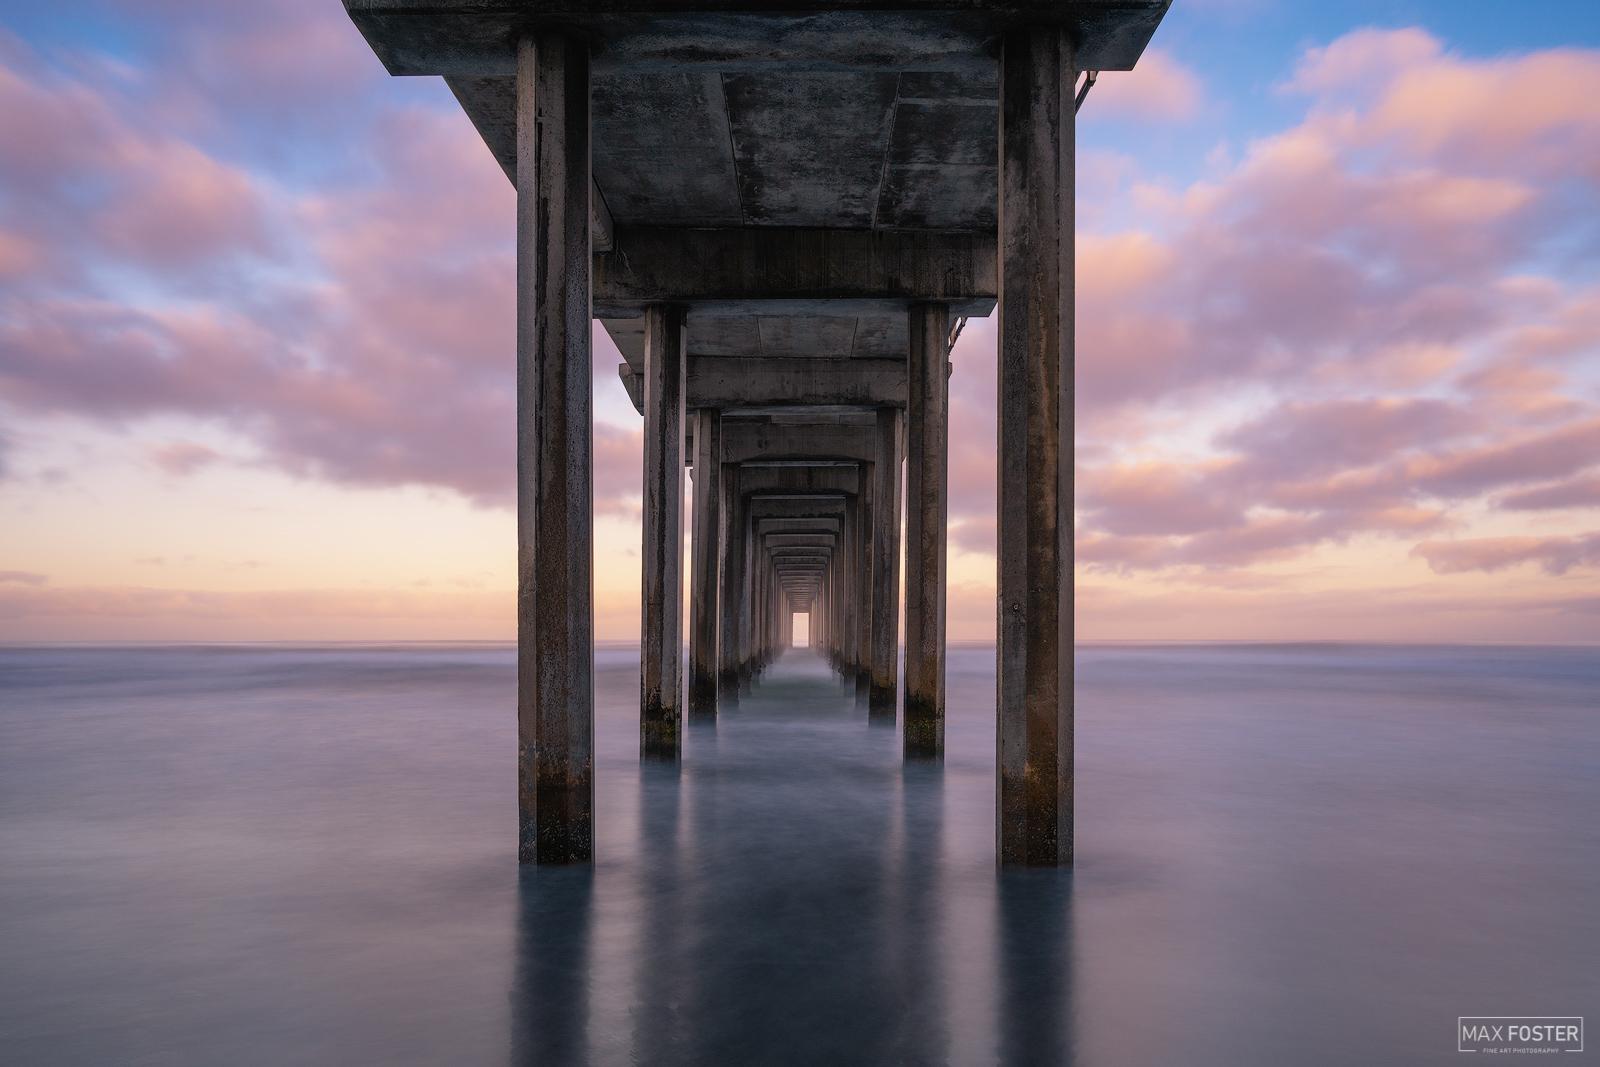 Bring your walls to life with Cotton Candy Skies, Max Foster's limited edition photography print of Scripps Pier, La Jolla from...